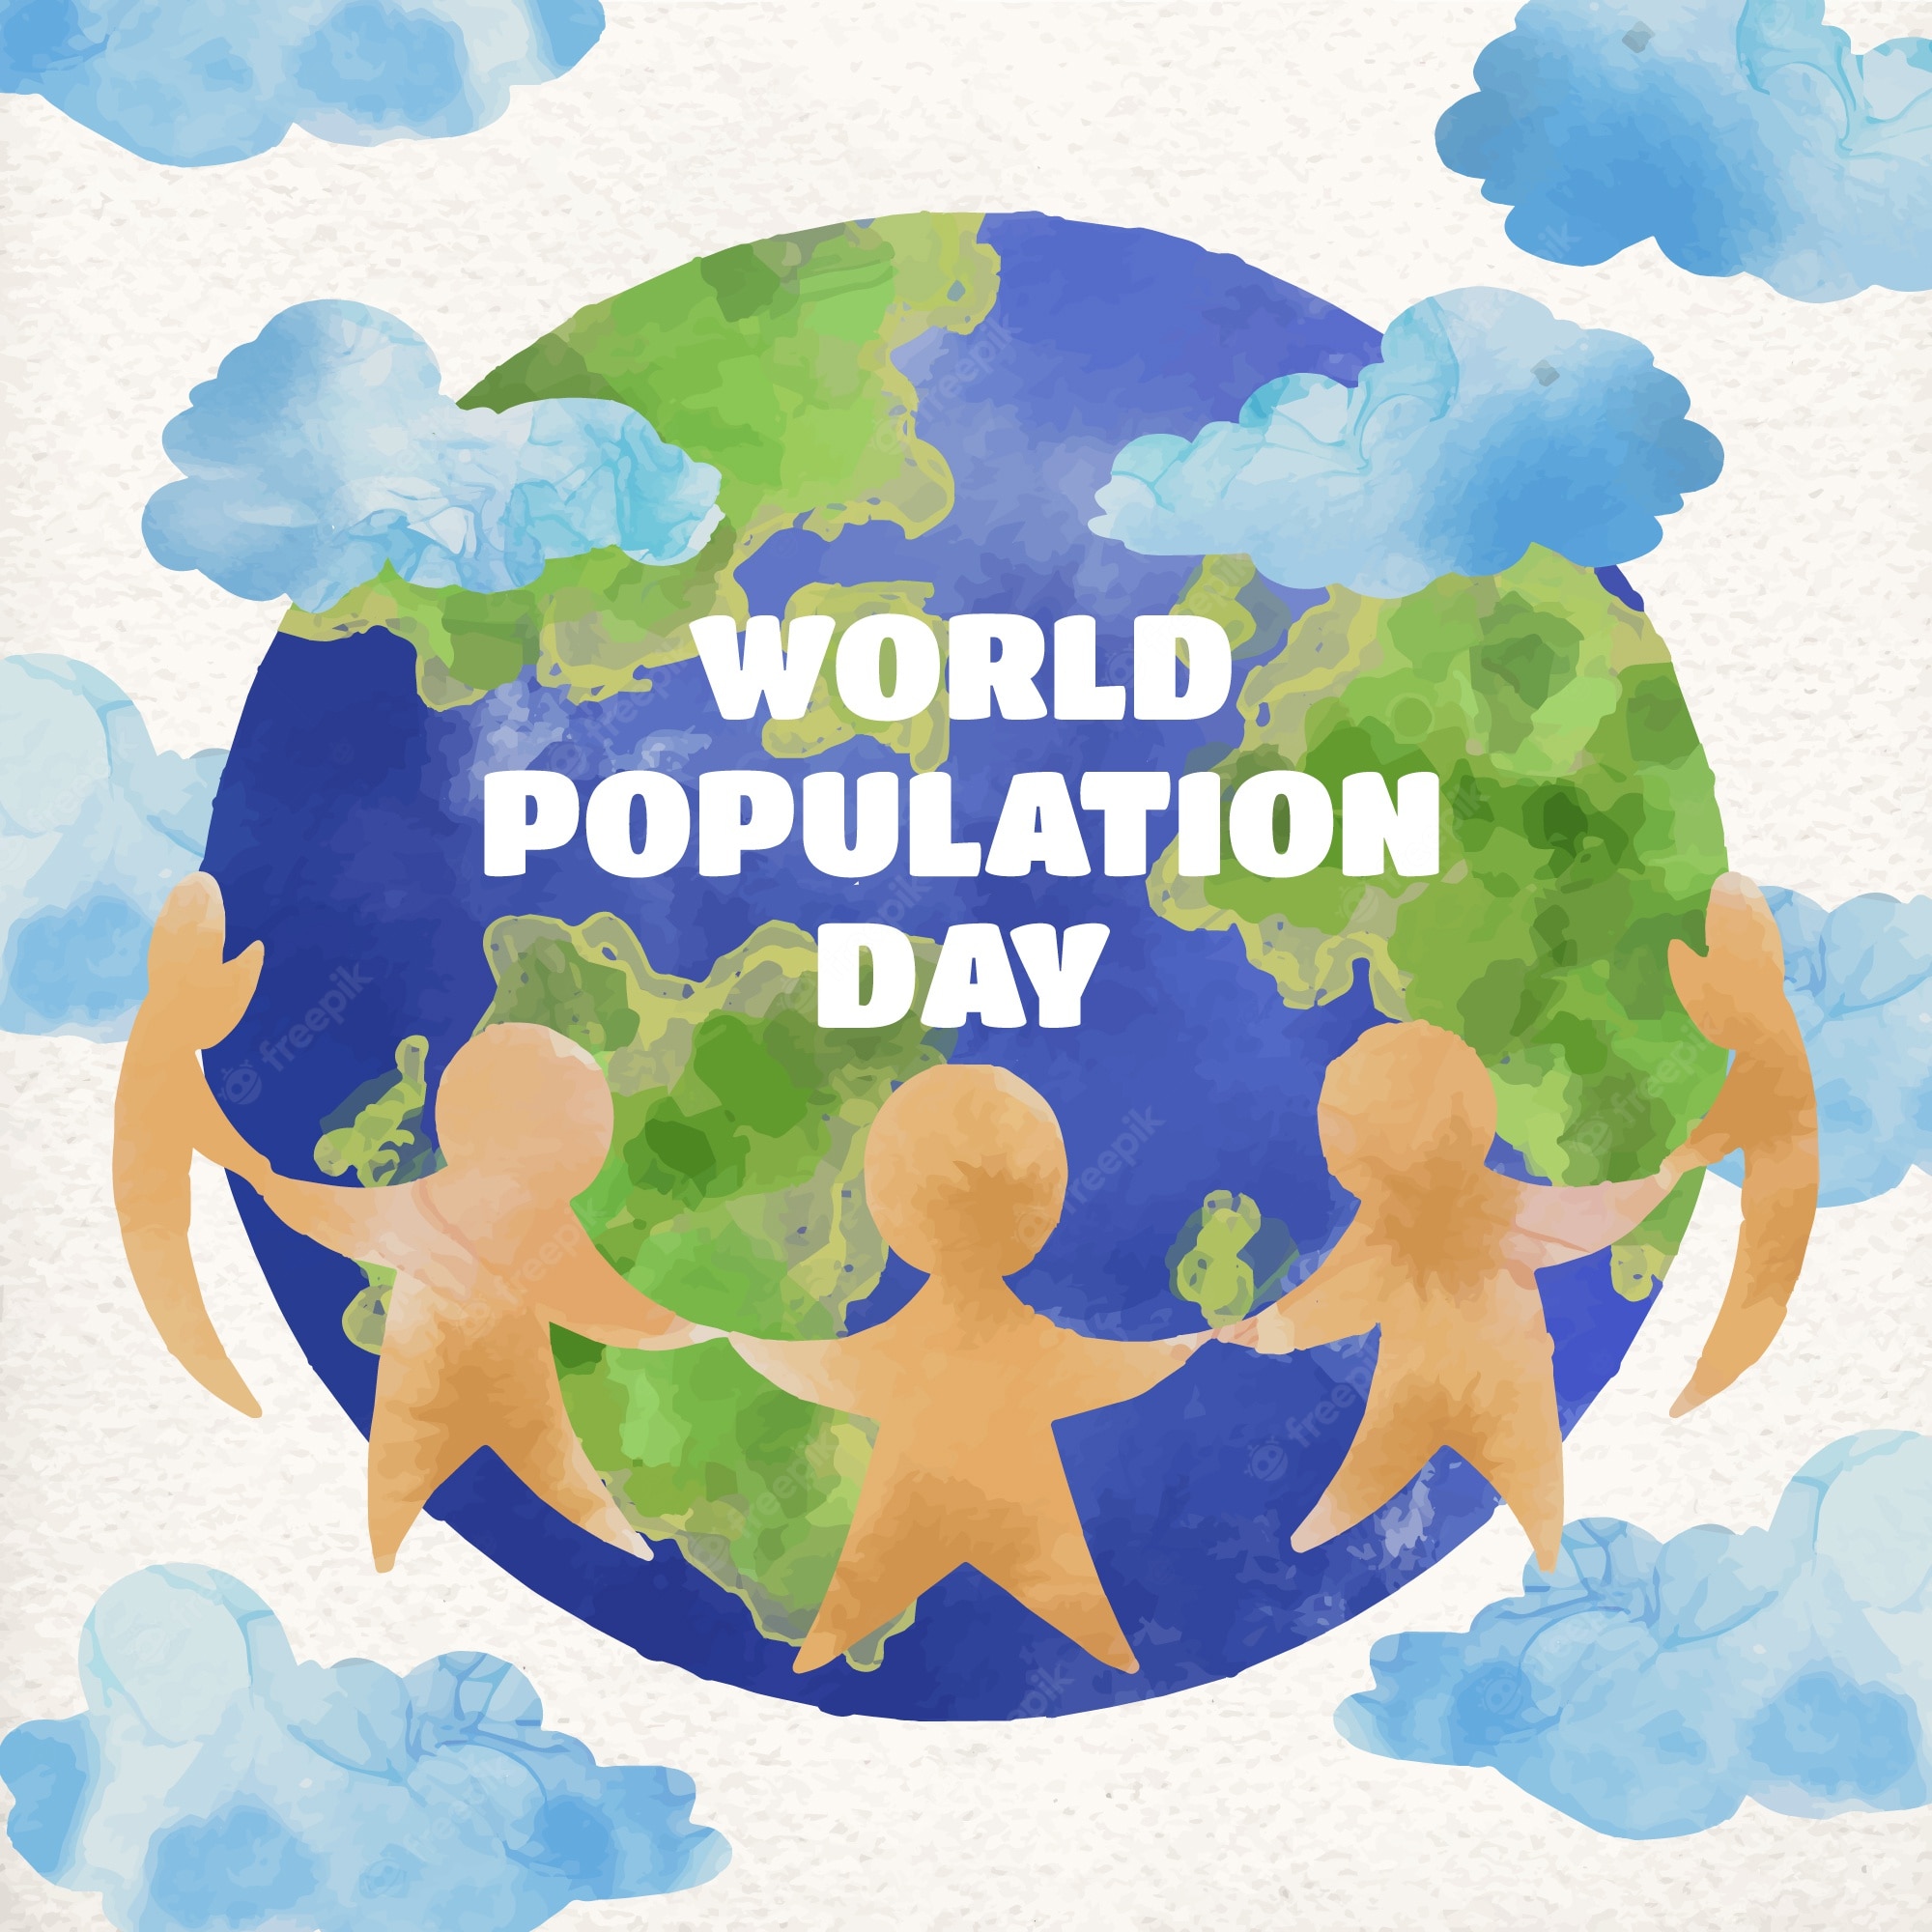 World Population Day, Cartoon People, Friendship On Earth Globe, Poster,  Template For Web, Vector Illustration Royalty Free SVG, Cliparts, Vectors,  and Stock Illustration. Image 151216369.